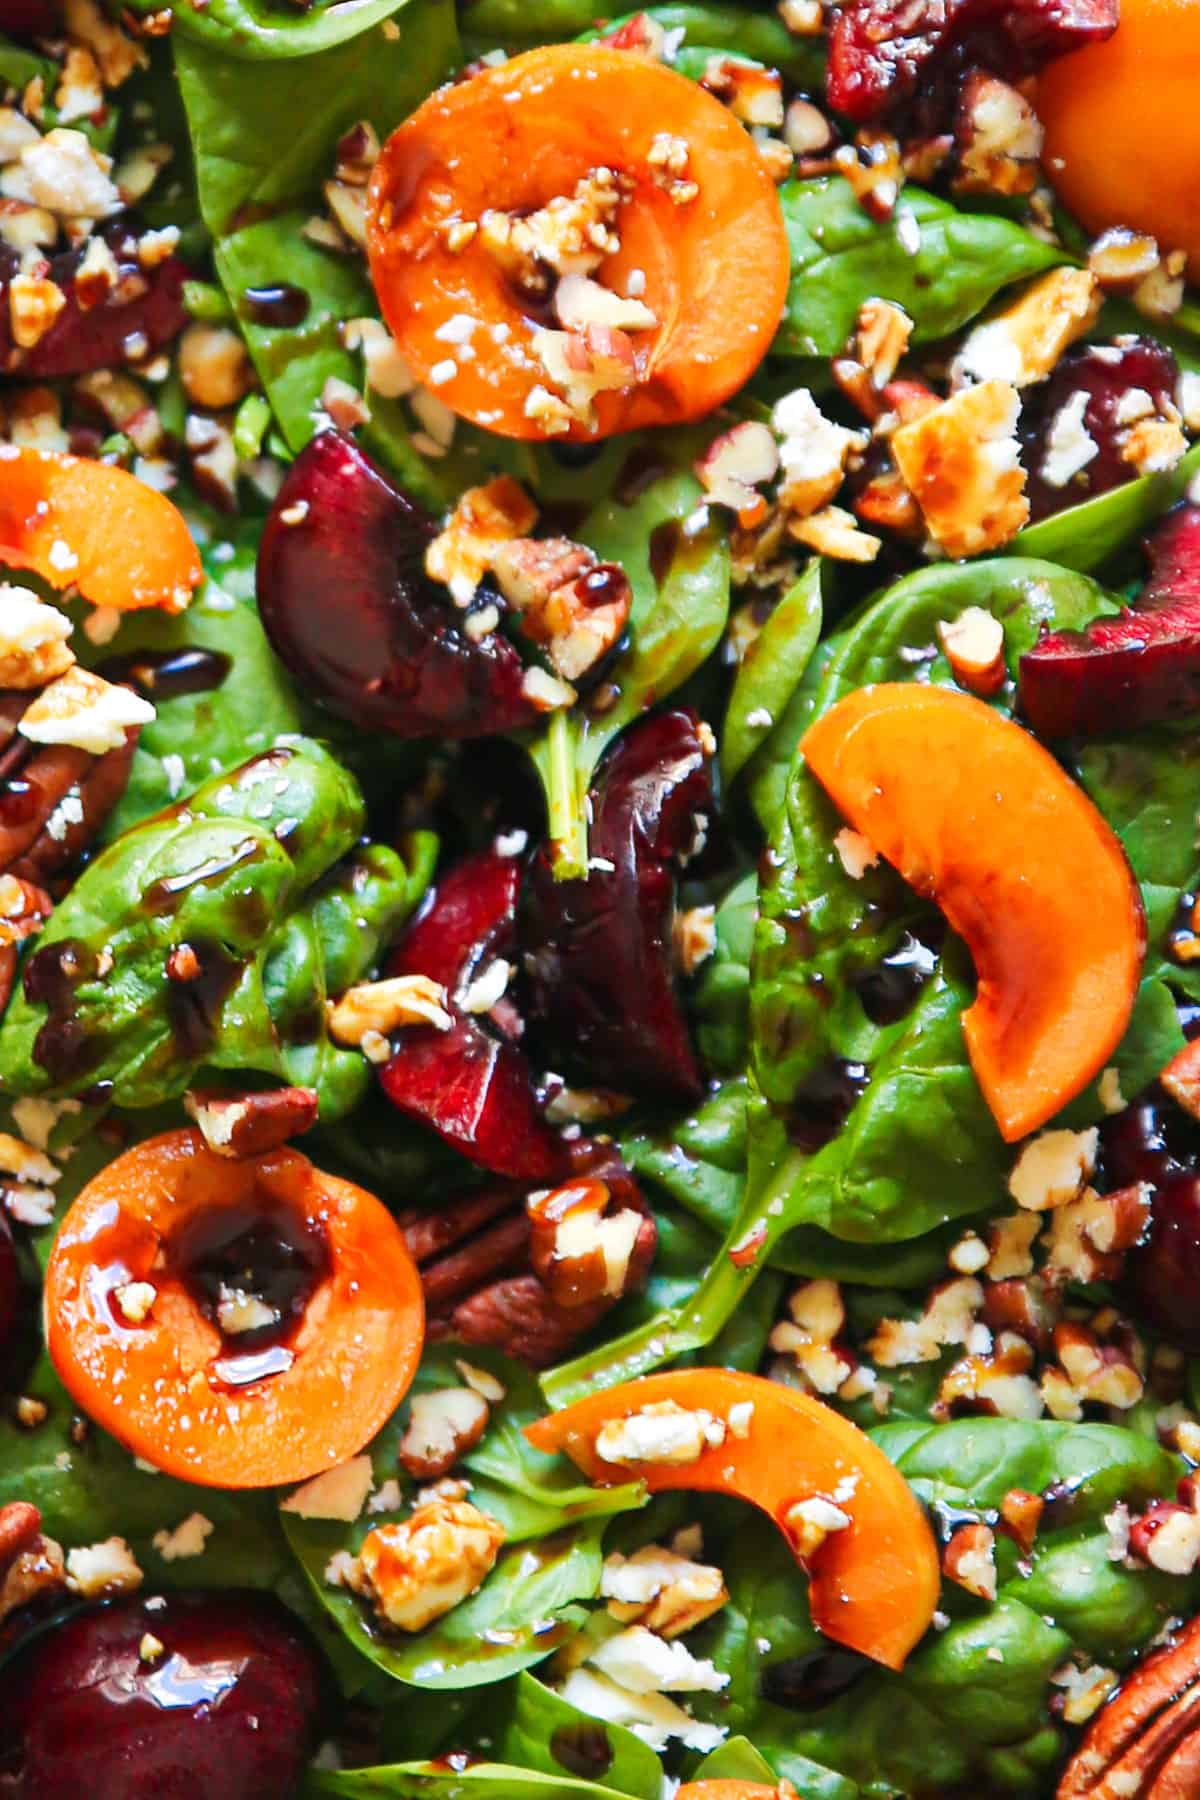 Apricot Salad with Spinach, Cherries, Pecans, Feta Cheese, and Balsamic Glaze - close-up photo.